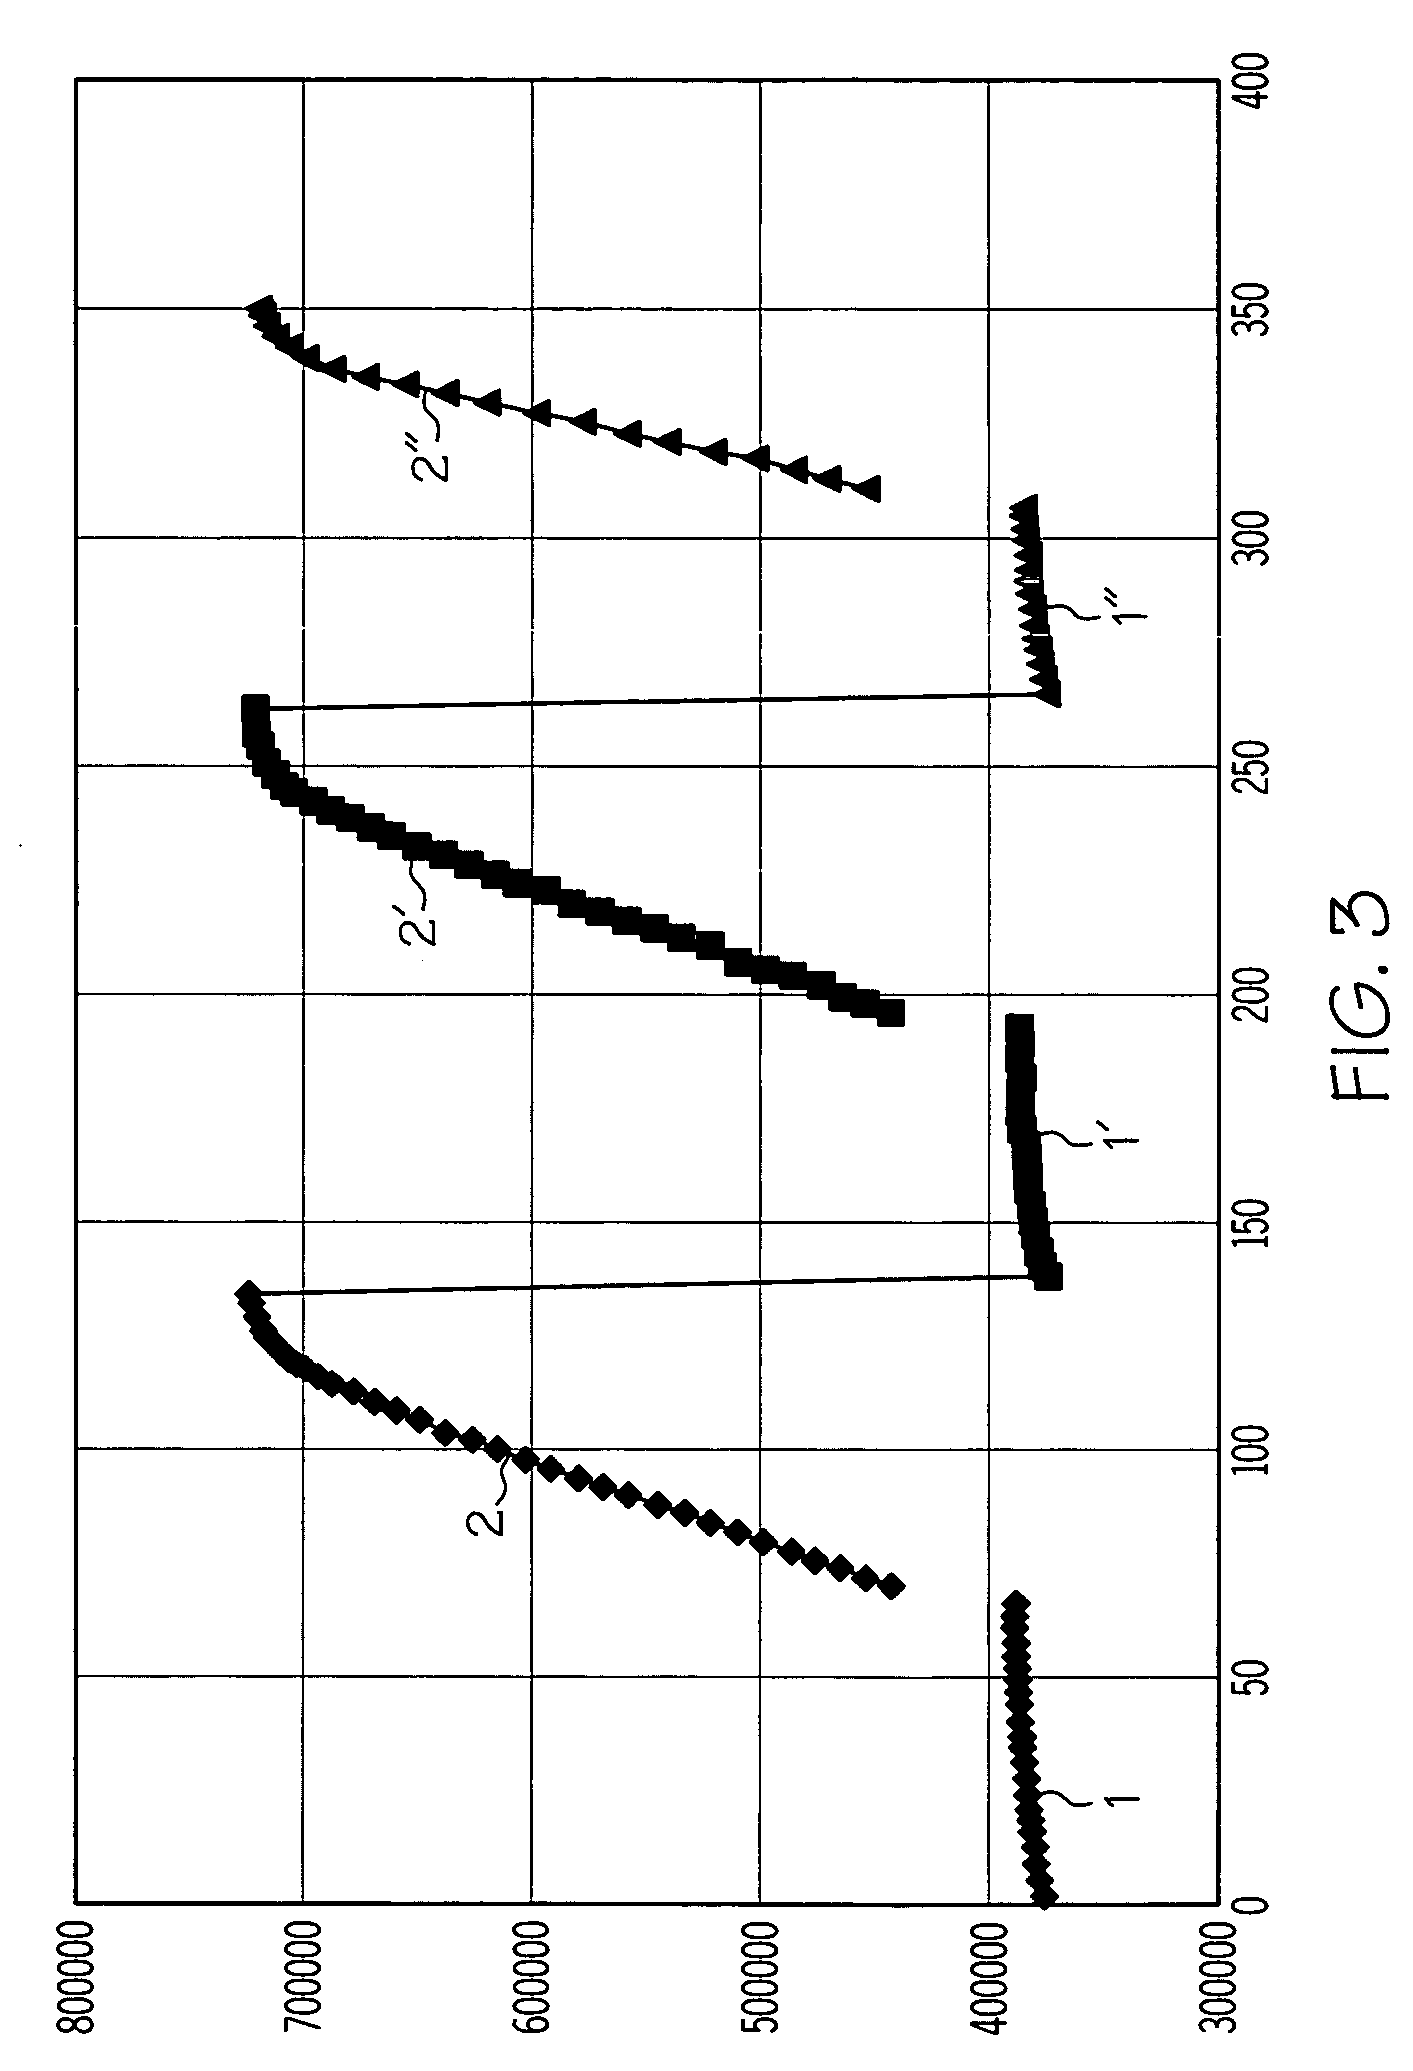 Diffusion layer for an enzyme-based sensor application